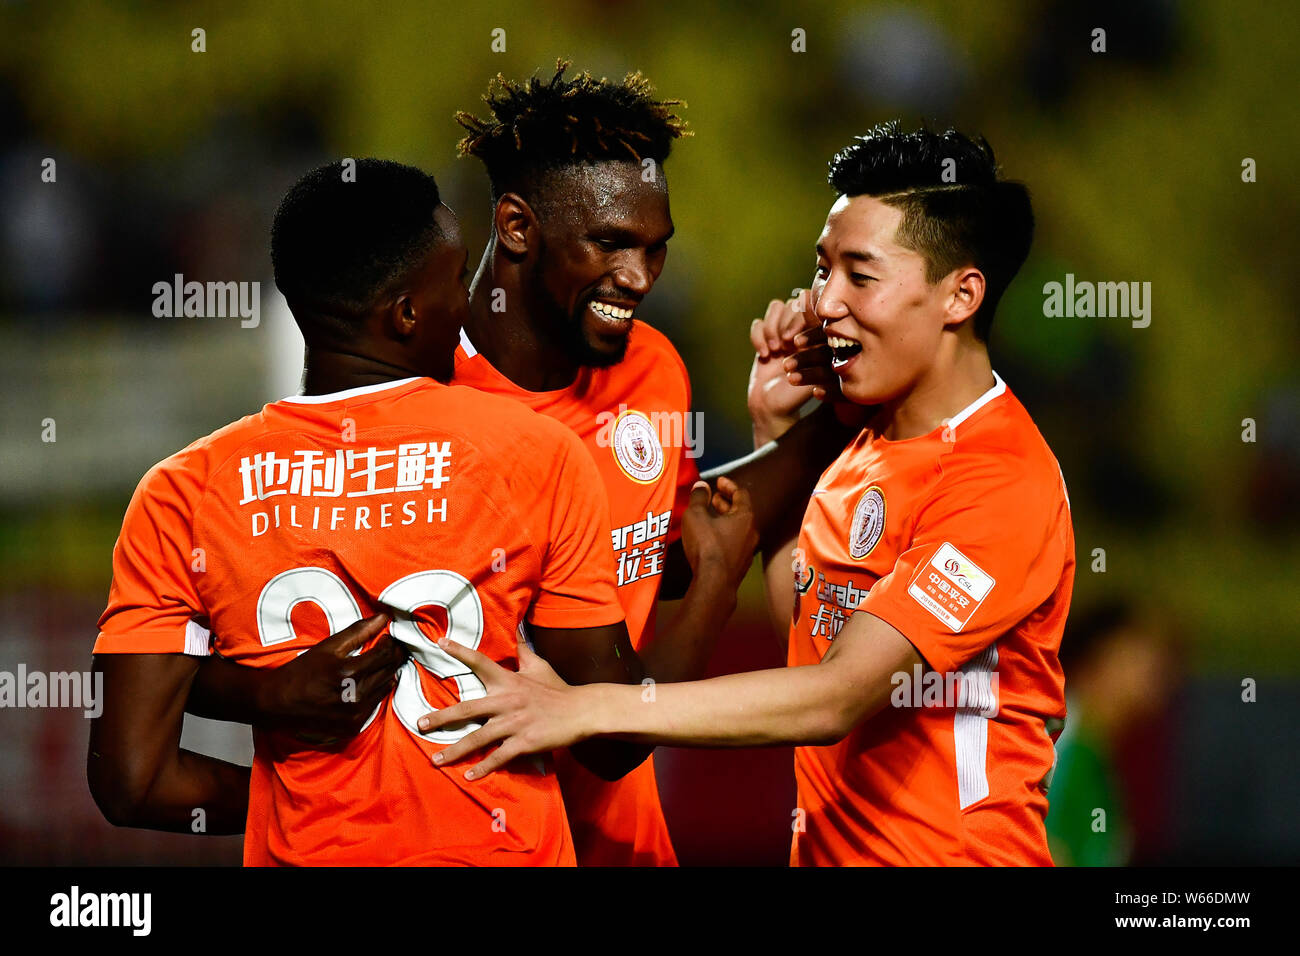 (From left) Cameroonian football player Benjamin Moukandjo, Senegalese football player Makhete Diop and Cao Yongjing of Beijing Renhe celebrate after Stock Photo